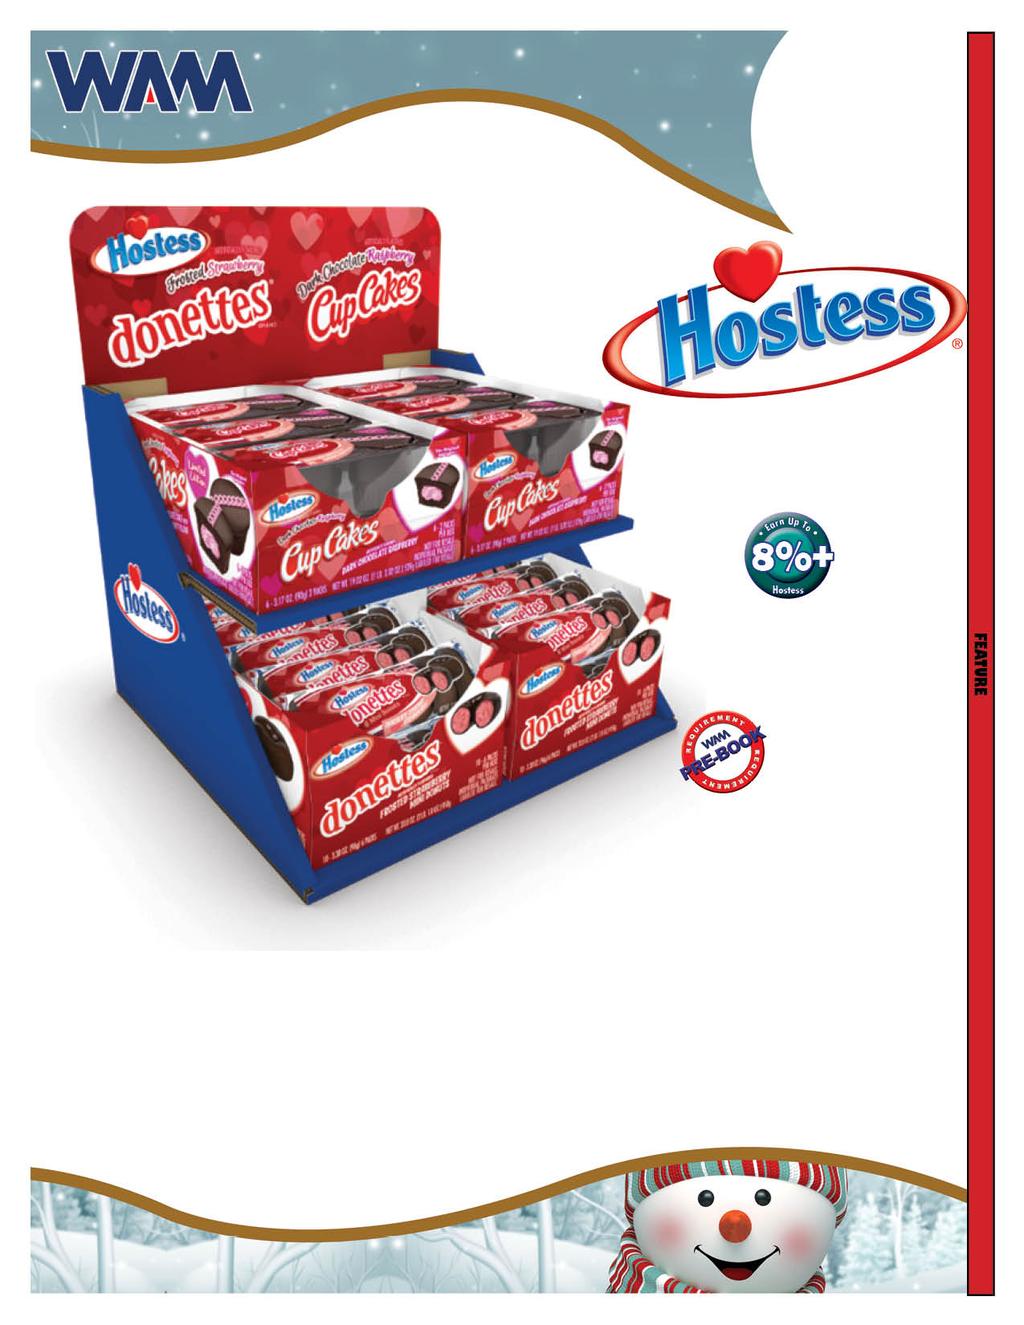 37.7% Delivery Date: 1/7/18 Hostess Valentine's Day Counter Unit (Fresh) #10199 $34.67 $1.00 $33.67 $1.69 37.